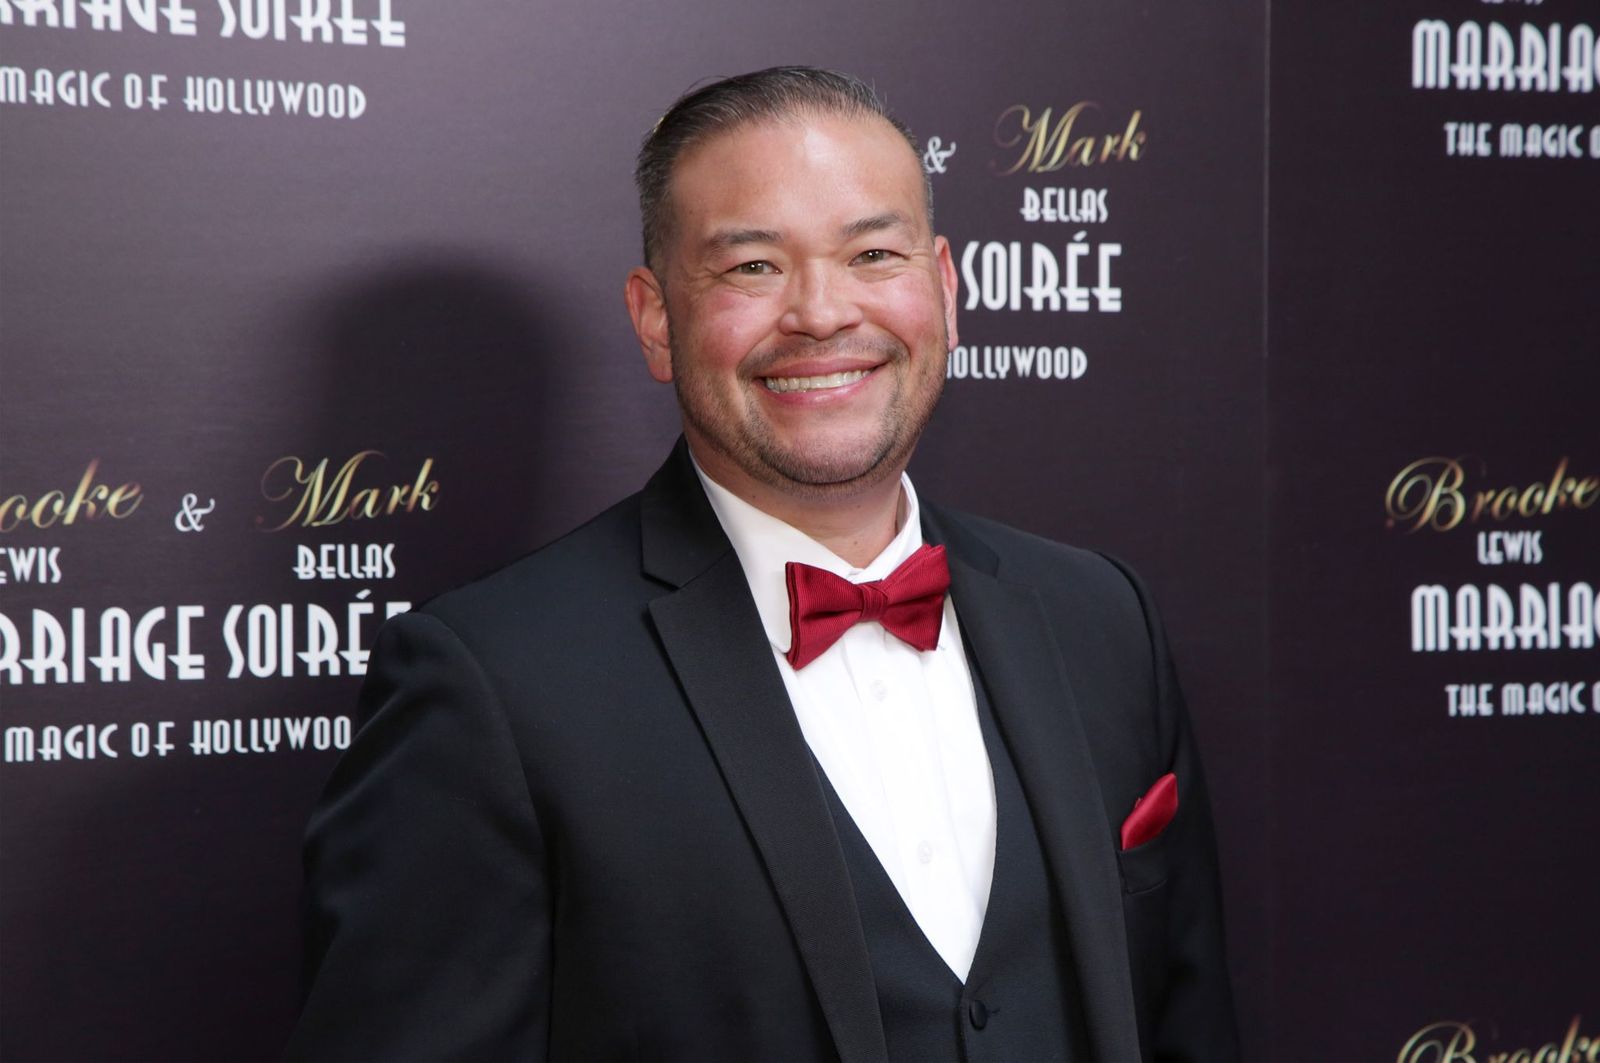 Jon Gosselin at Brooke & Mark's Marriage Soiree "The Magic Of Hollywood" at the Houdini Estate on June 01, 2019 | Photo: Getty Images